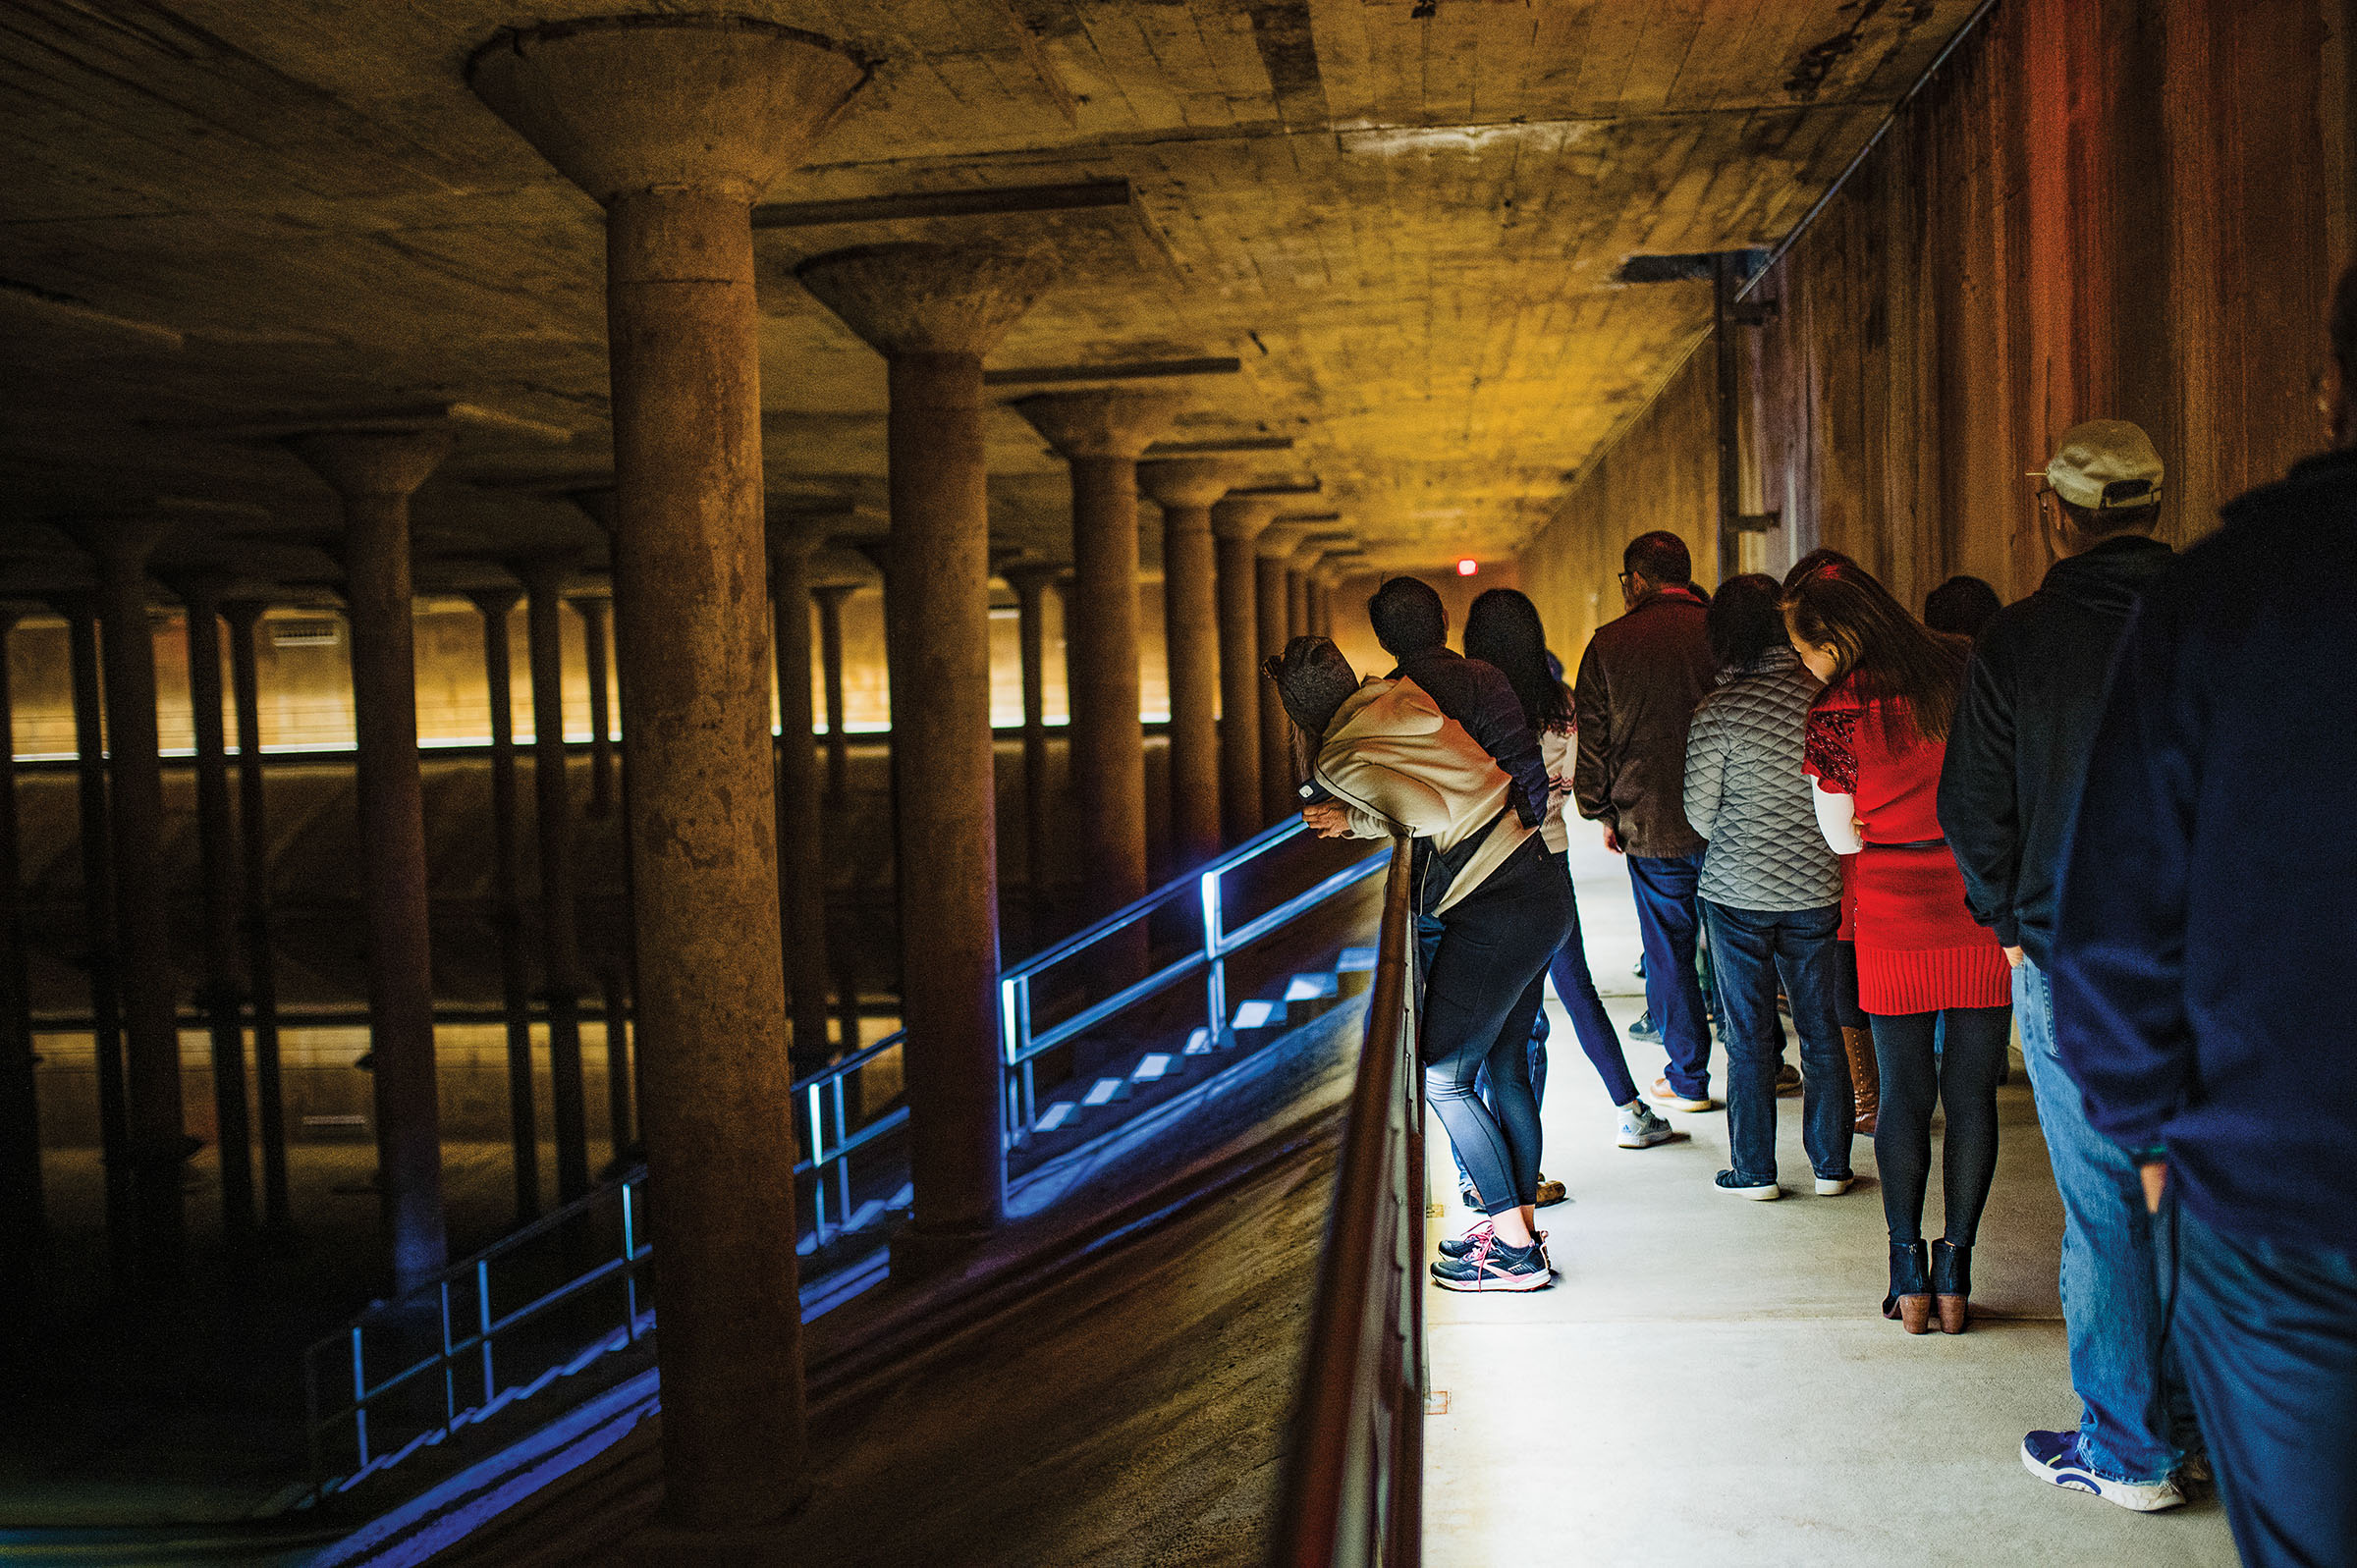 A group of people stand on a lit bridge looking into a dark cistern